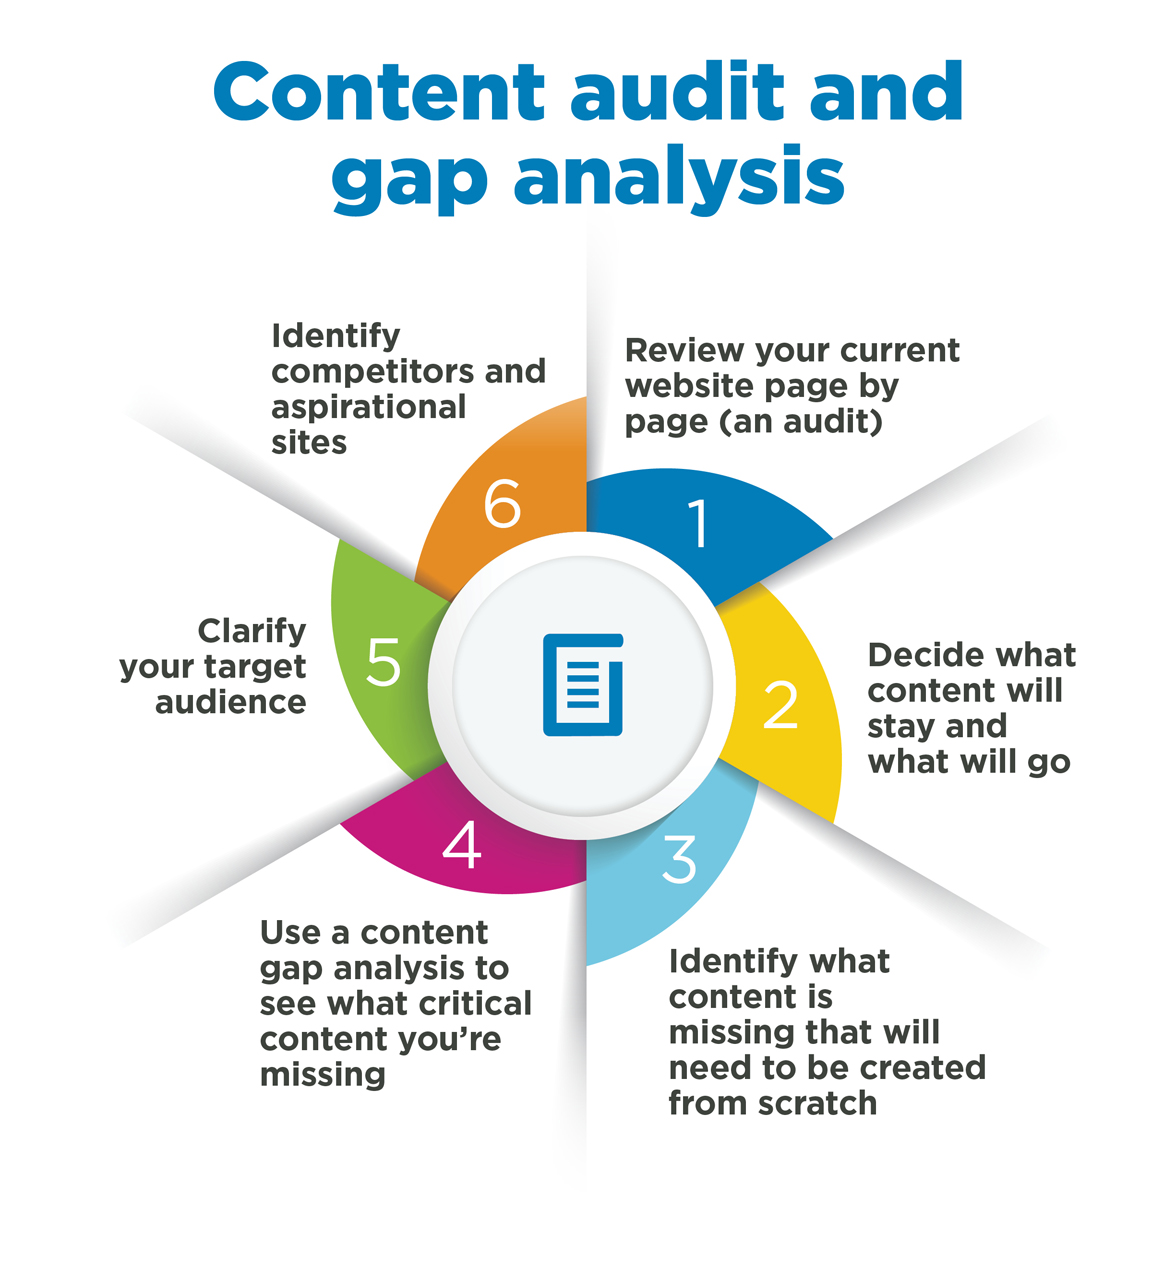 WG Content's approach to content audit and gap analysis.